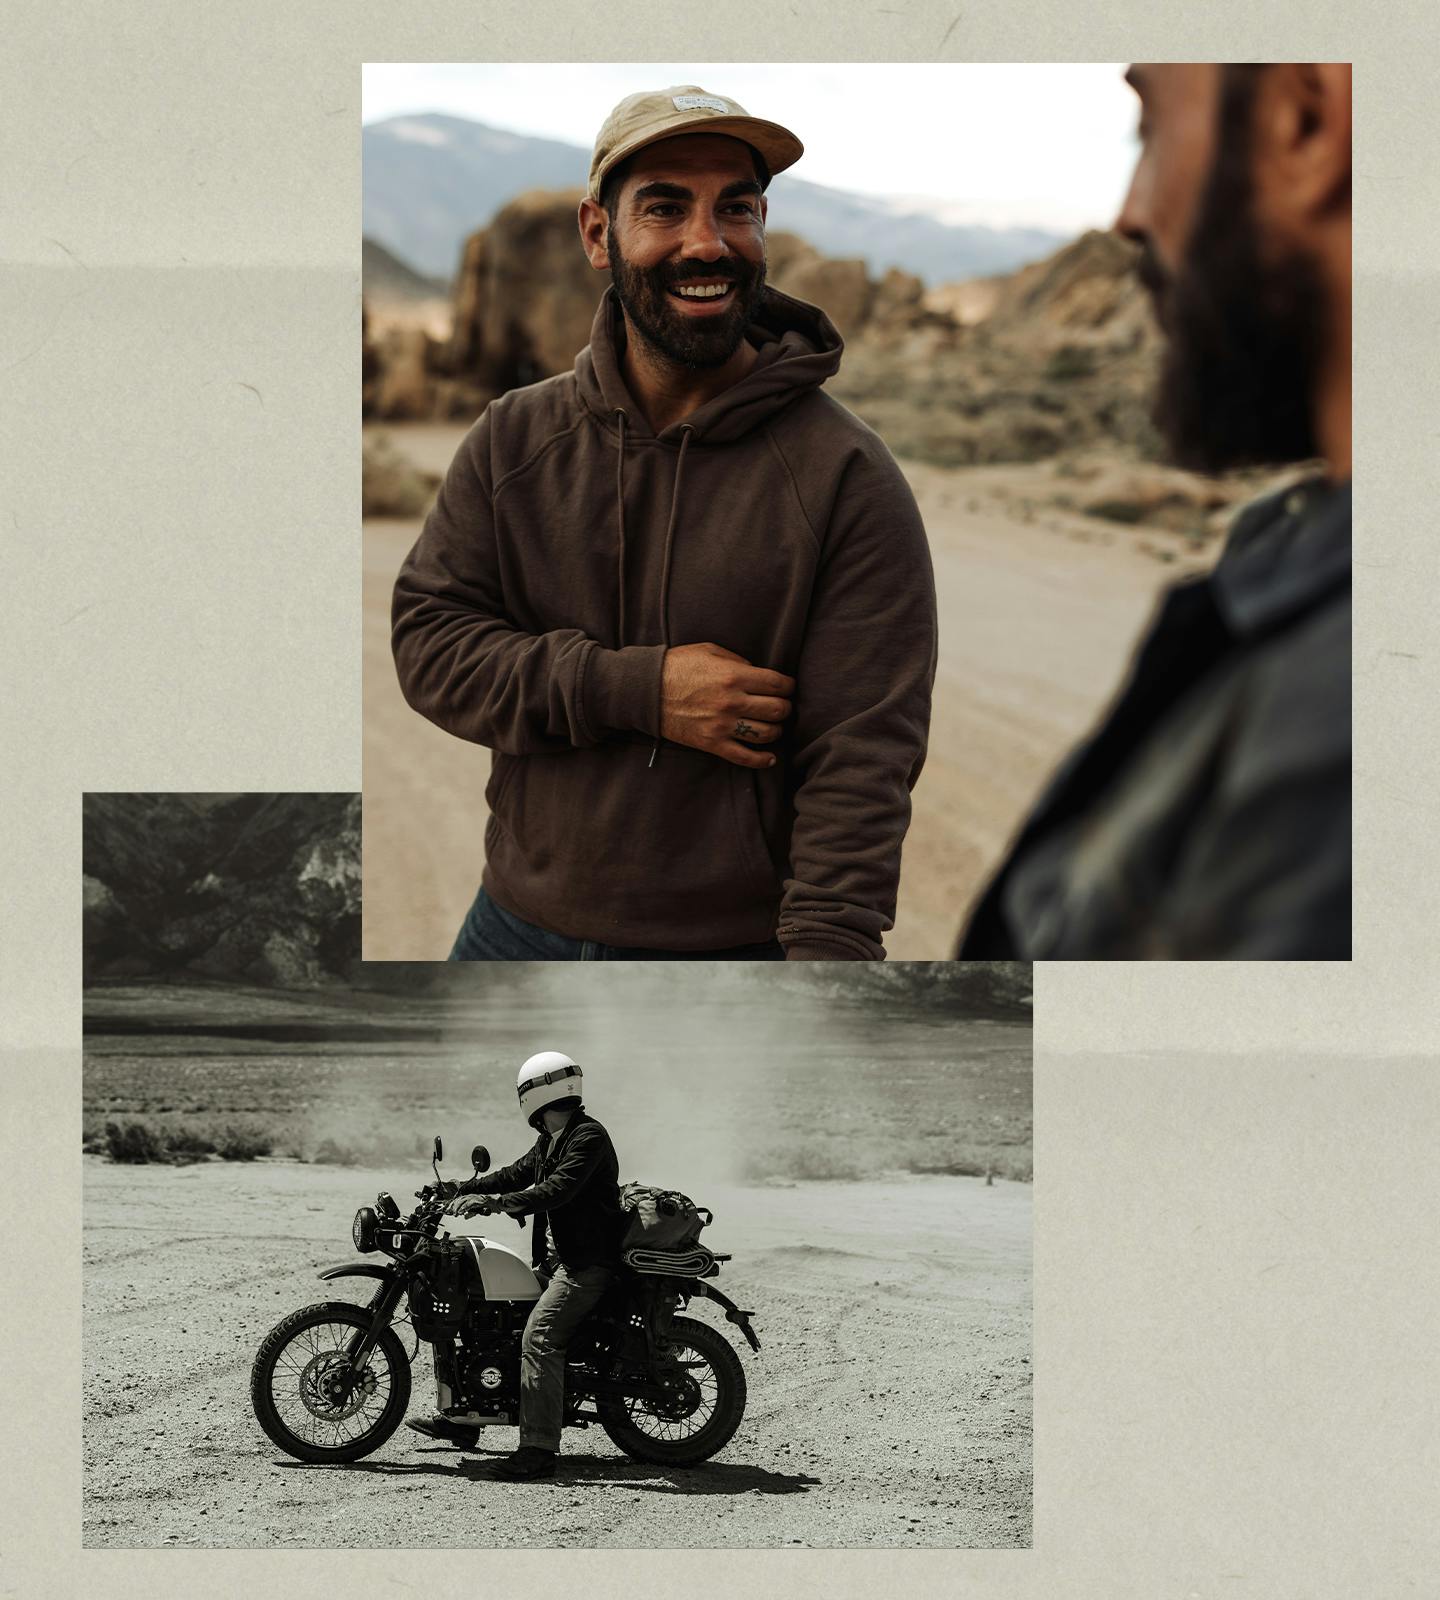 Collage of imagery of 10-Year hoodie and man on motorcycle